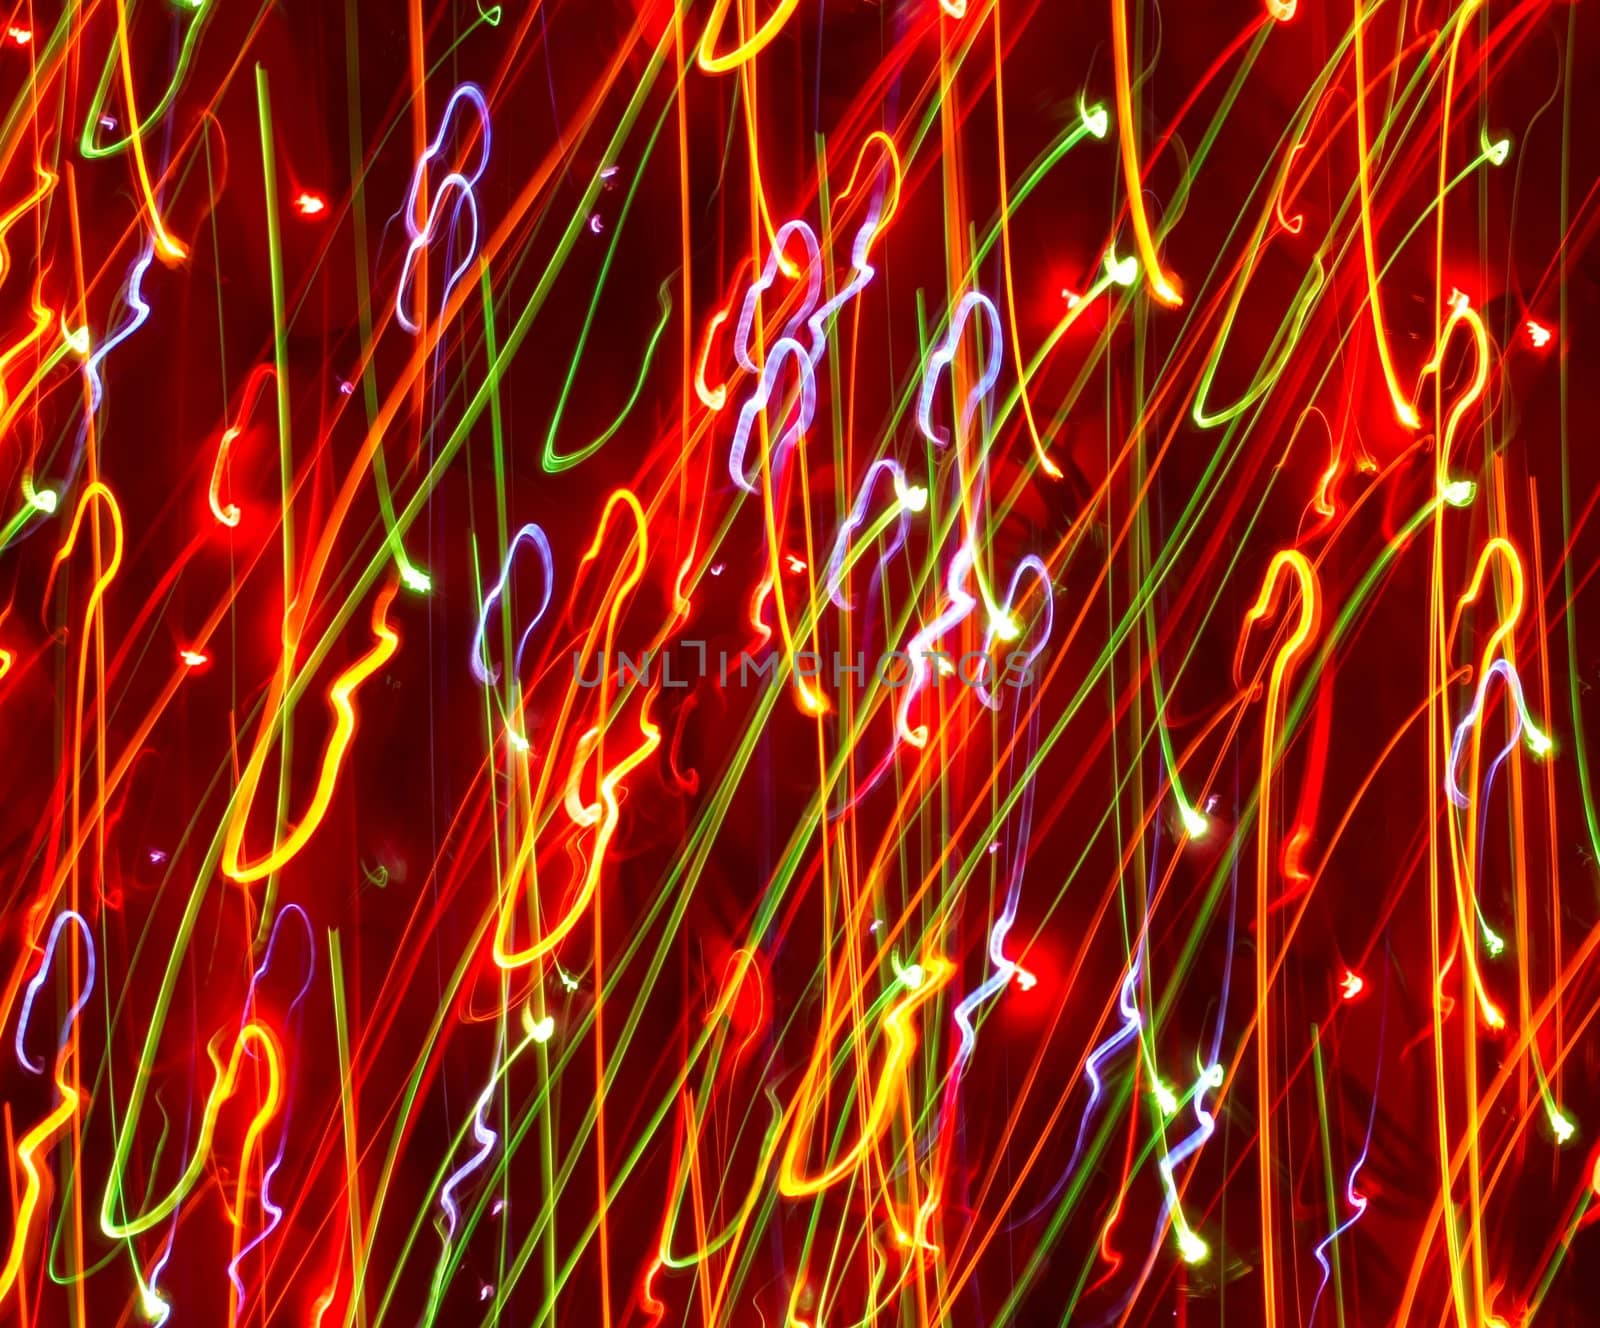 colored light motion blurs #1 by starush